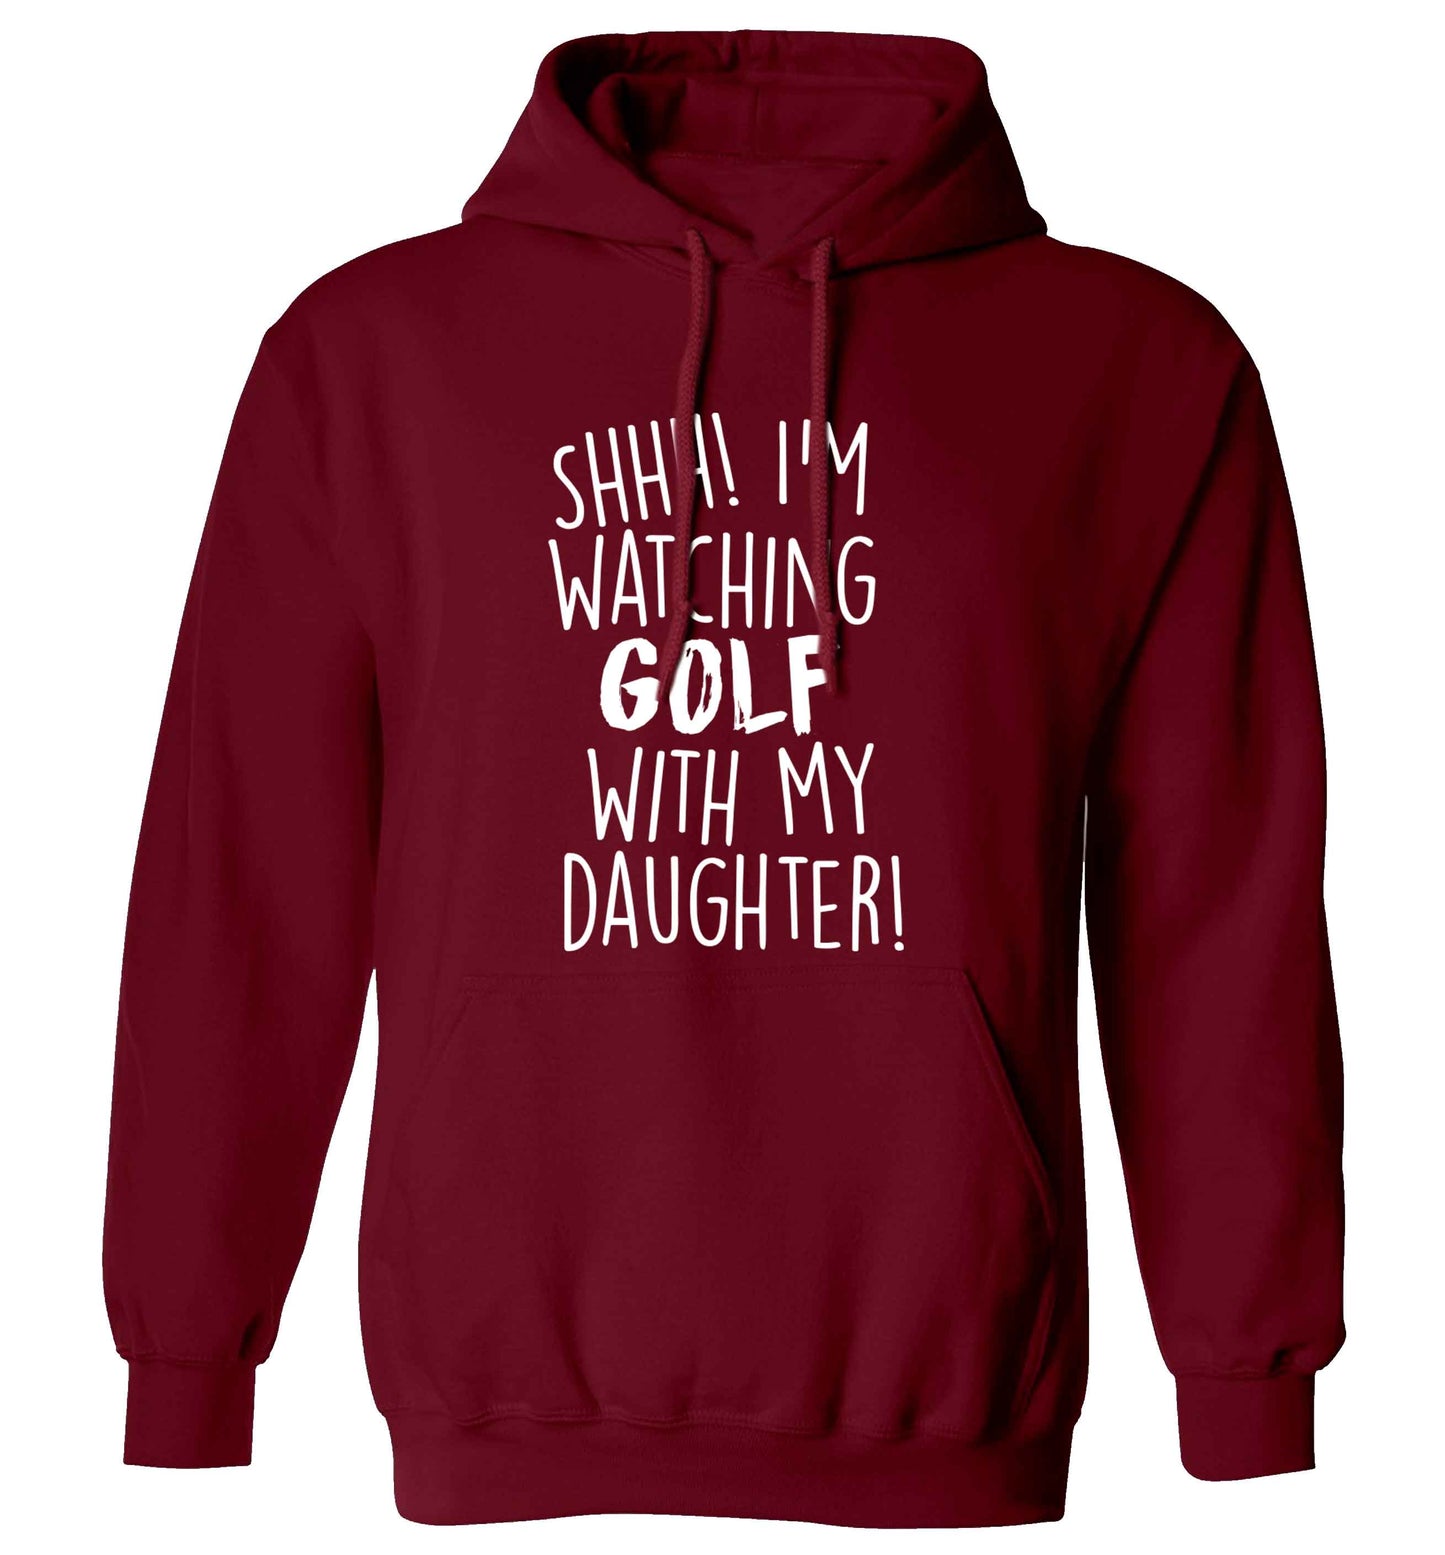 Shh I'm watching golf with my daughter adults unisex maroon hoodie 2XL